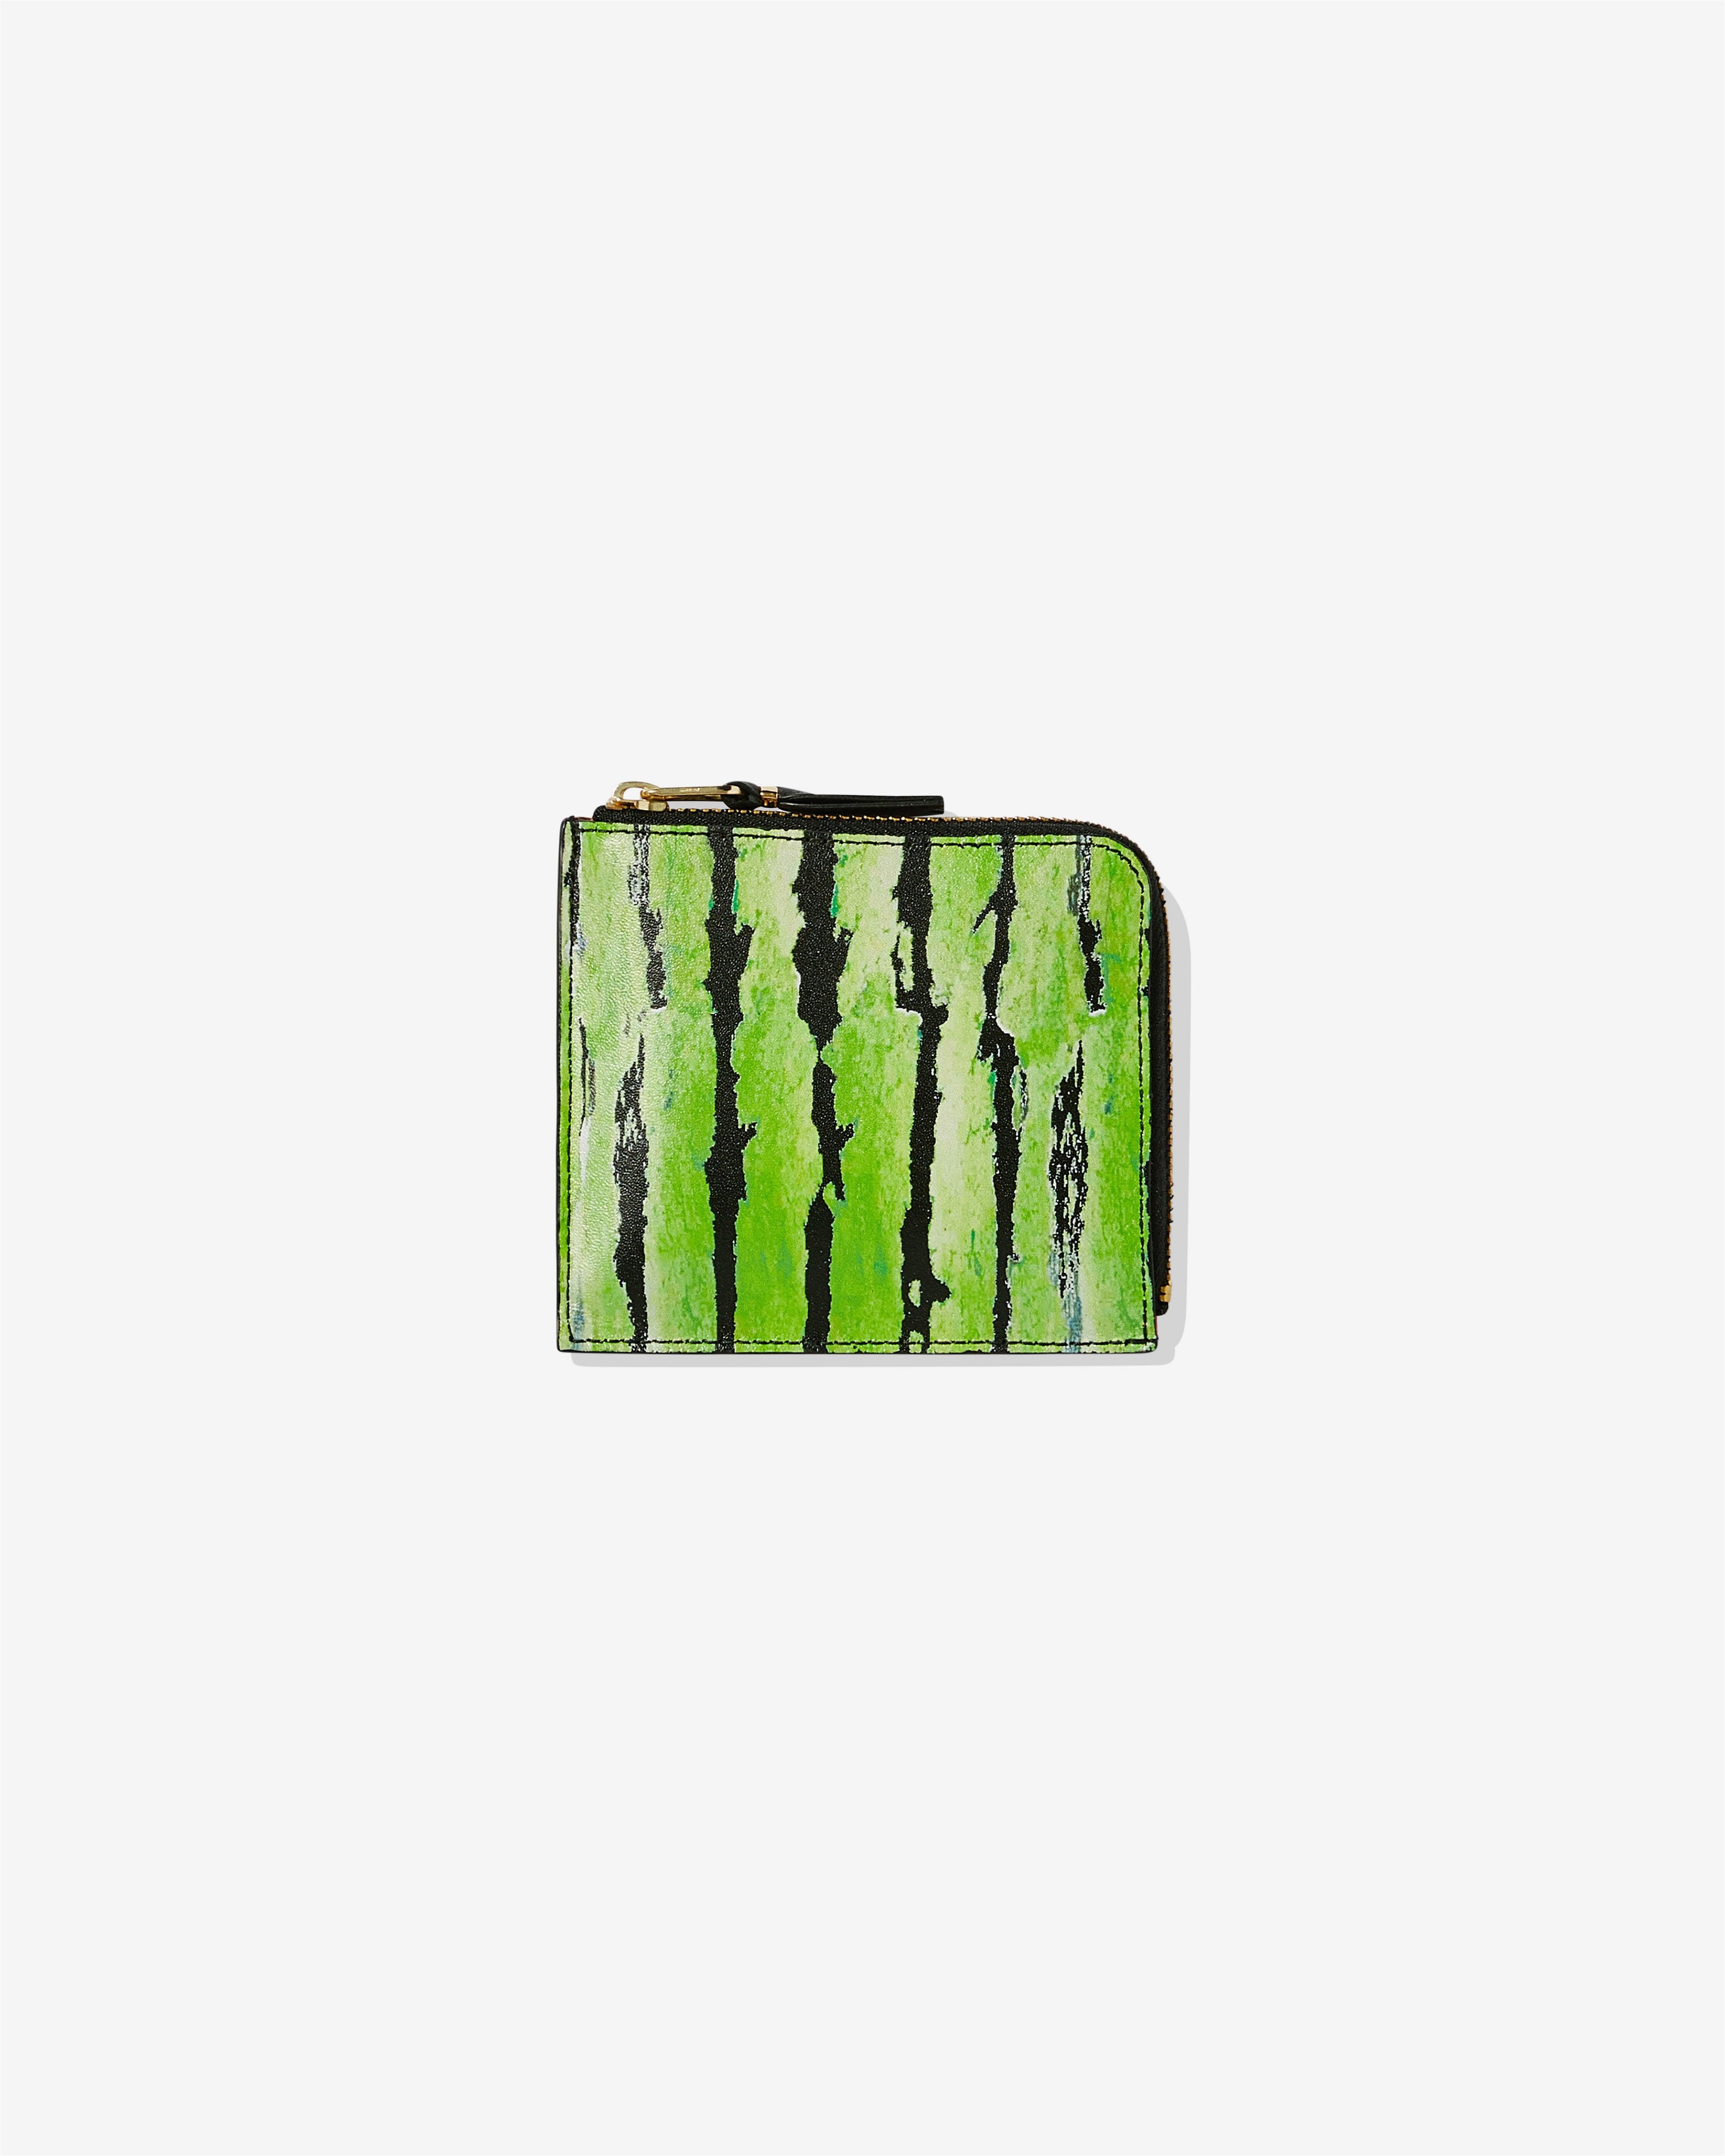 Denim Tears - CDG Watermelon Zip Around Wallet - (Green) SA3100 by COMME DES GARCONS